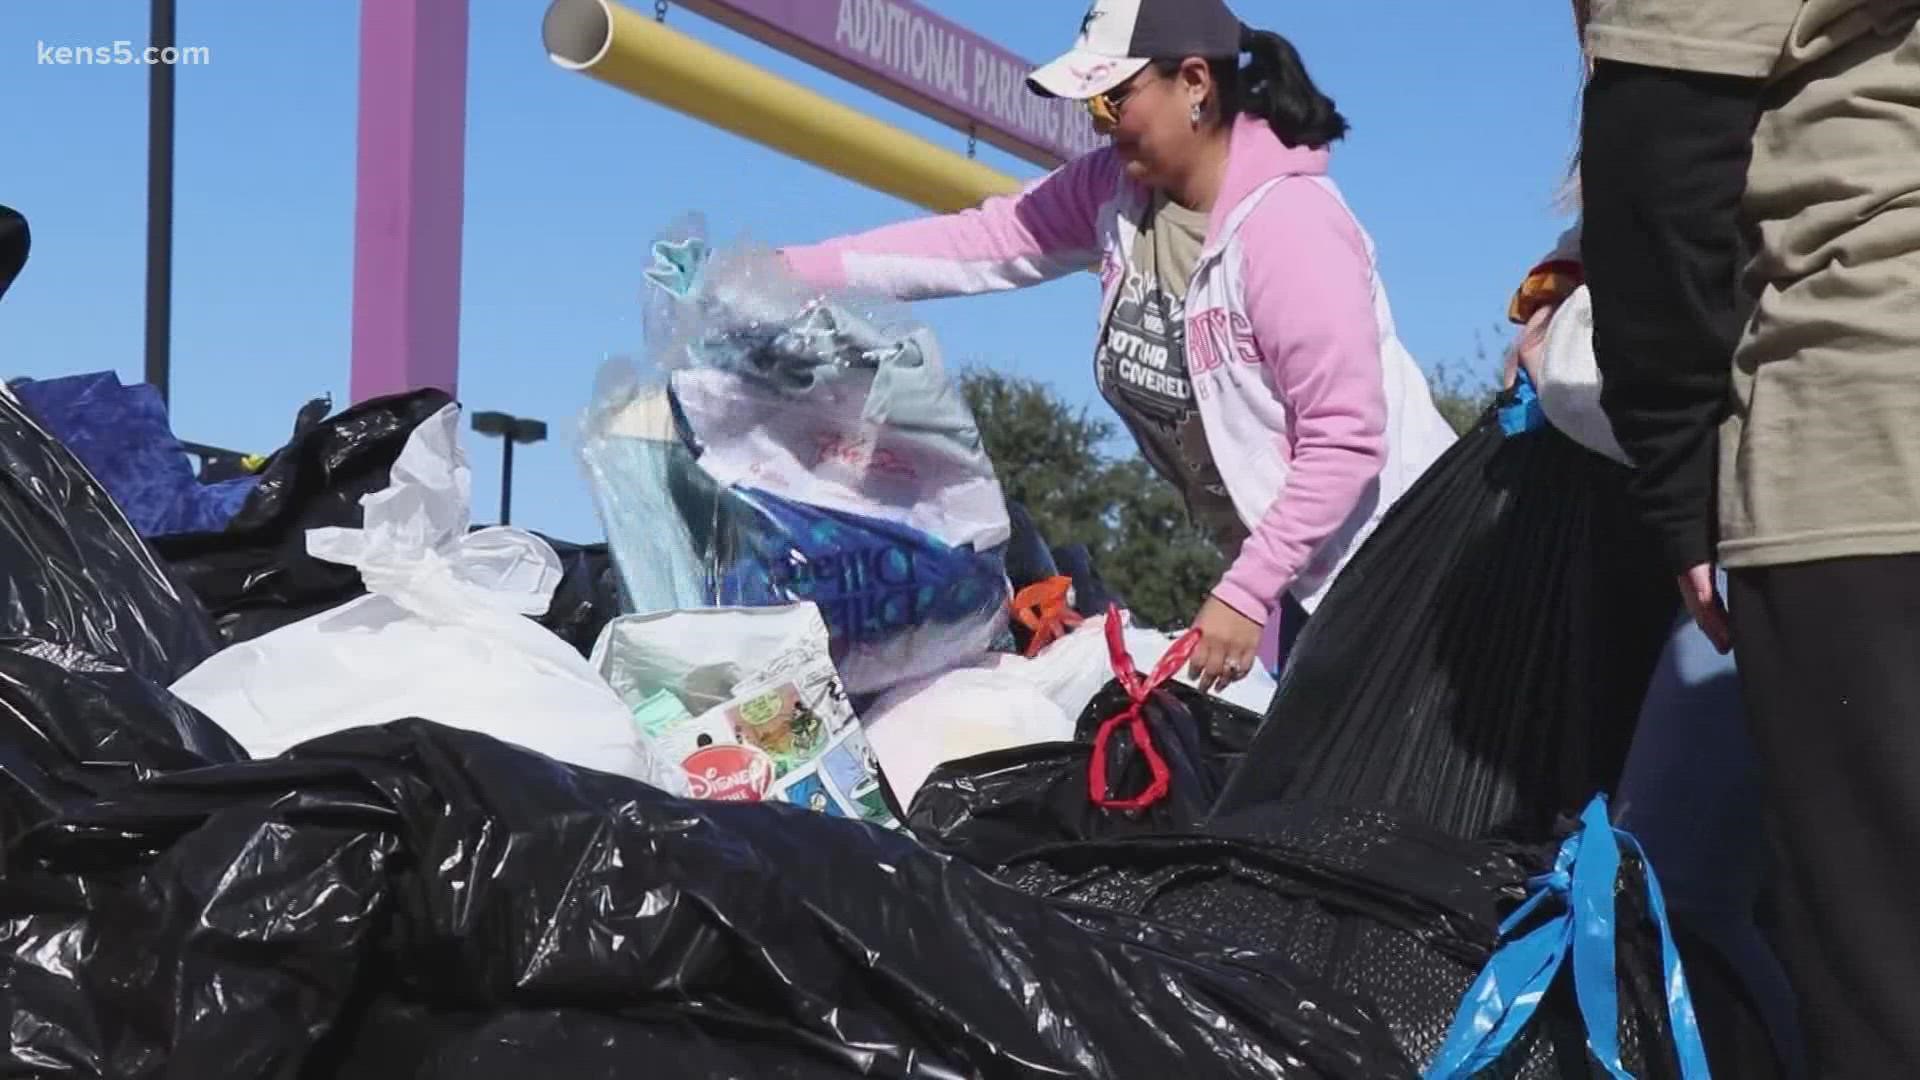 The collection drive brings in at least 60,000 pounds of donations each year.